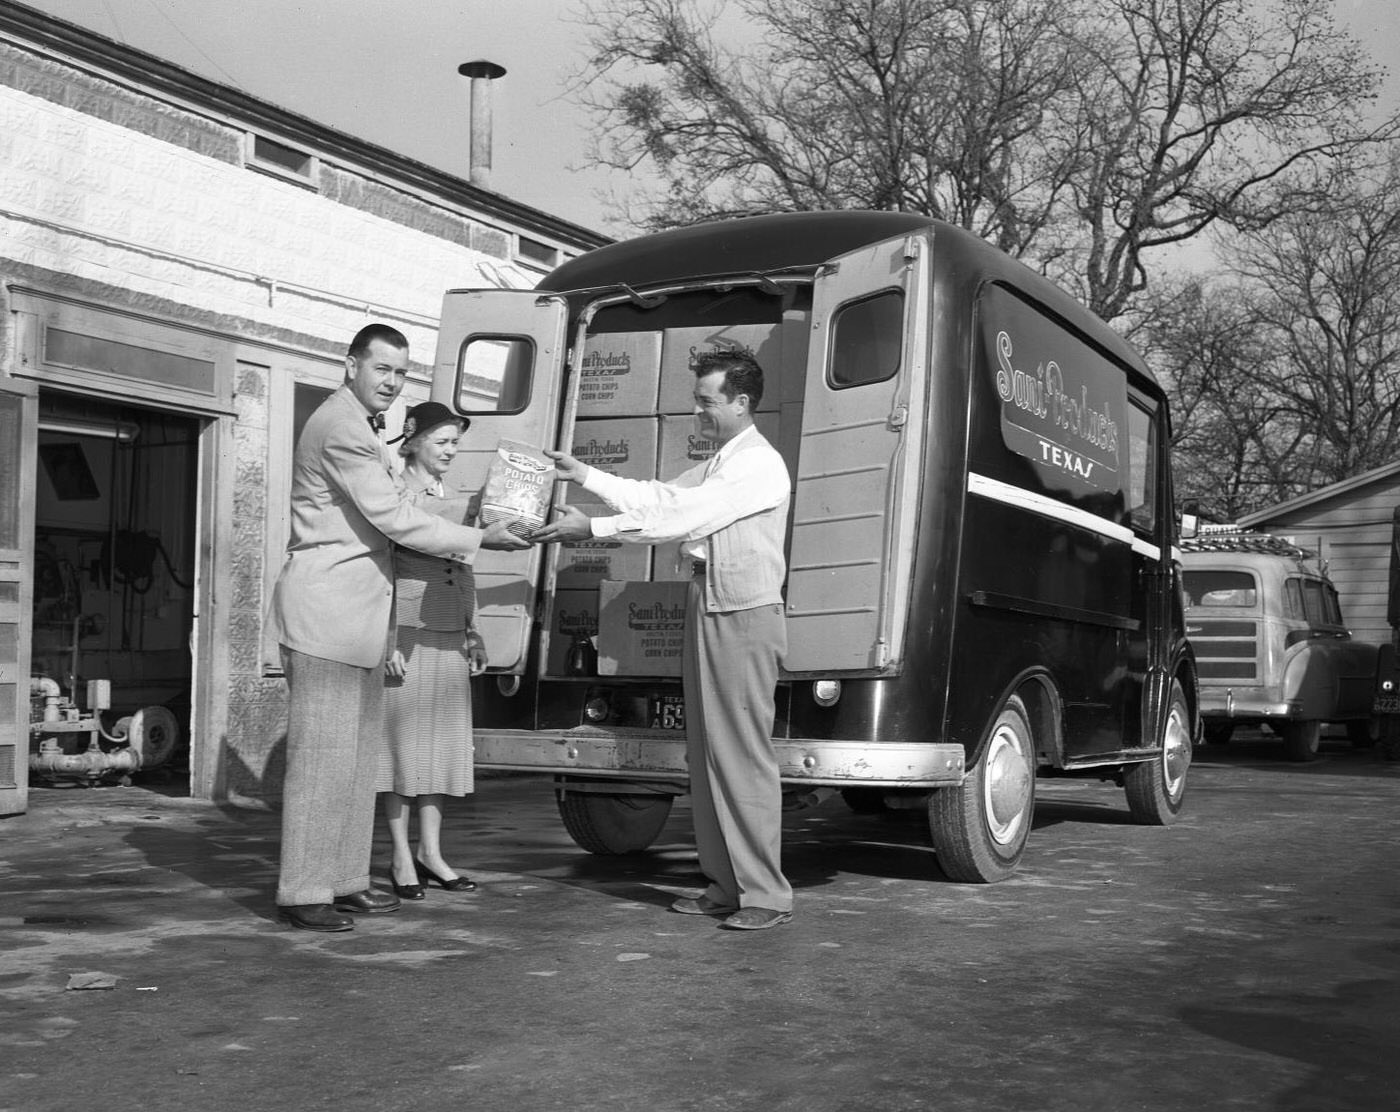 Sani-Products Employee Distributing Snacks from Truck, 1953.